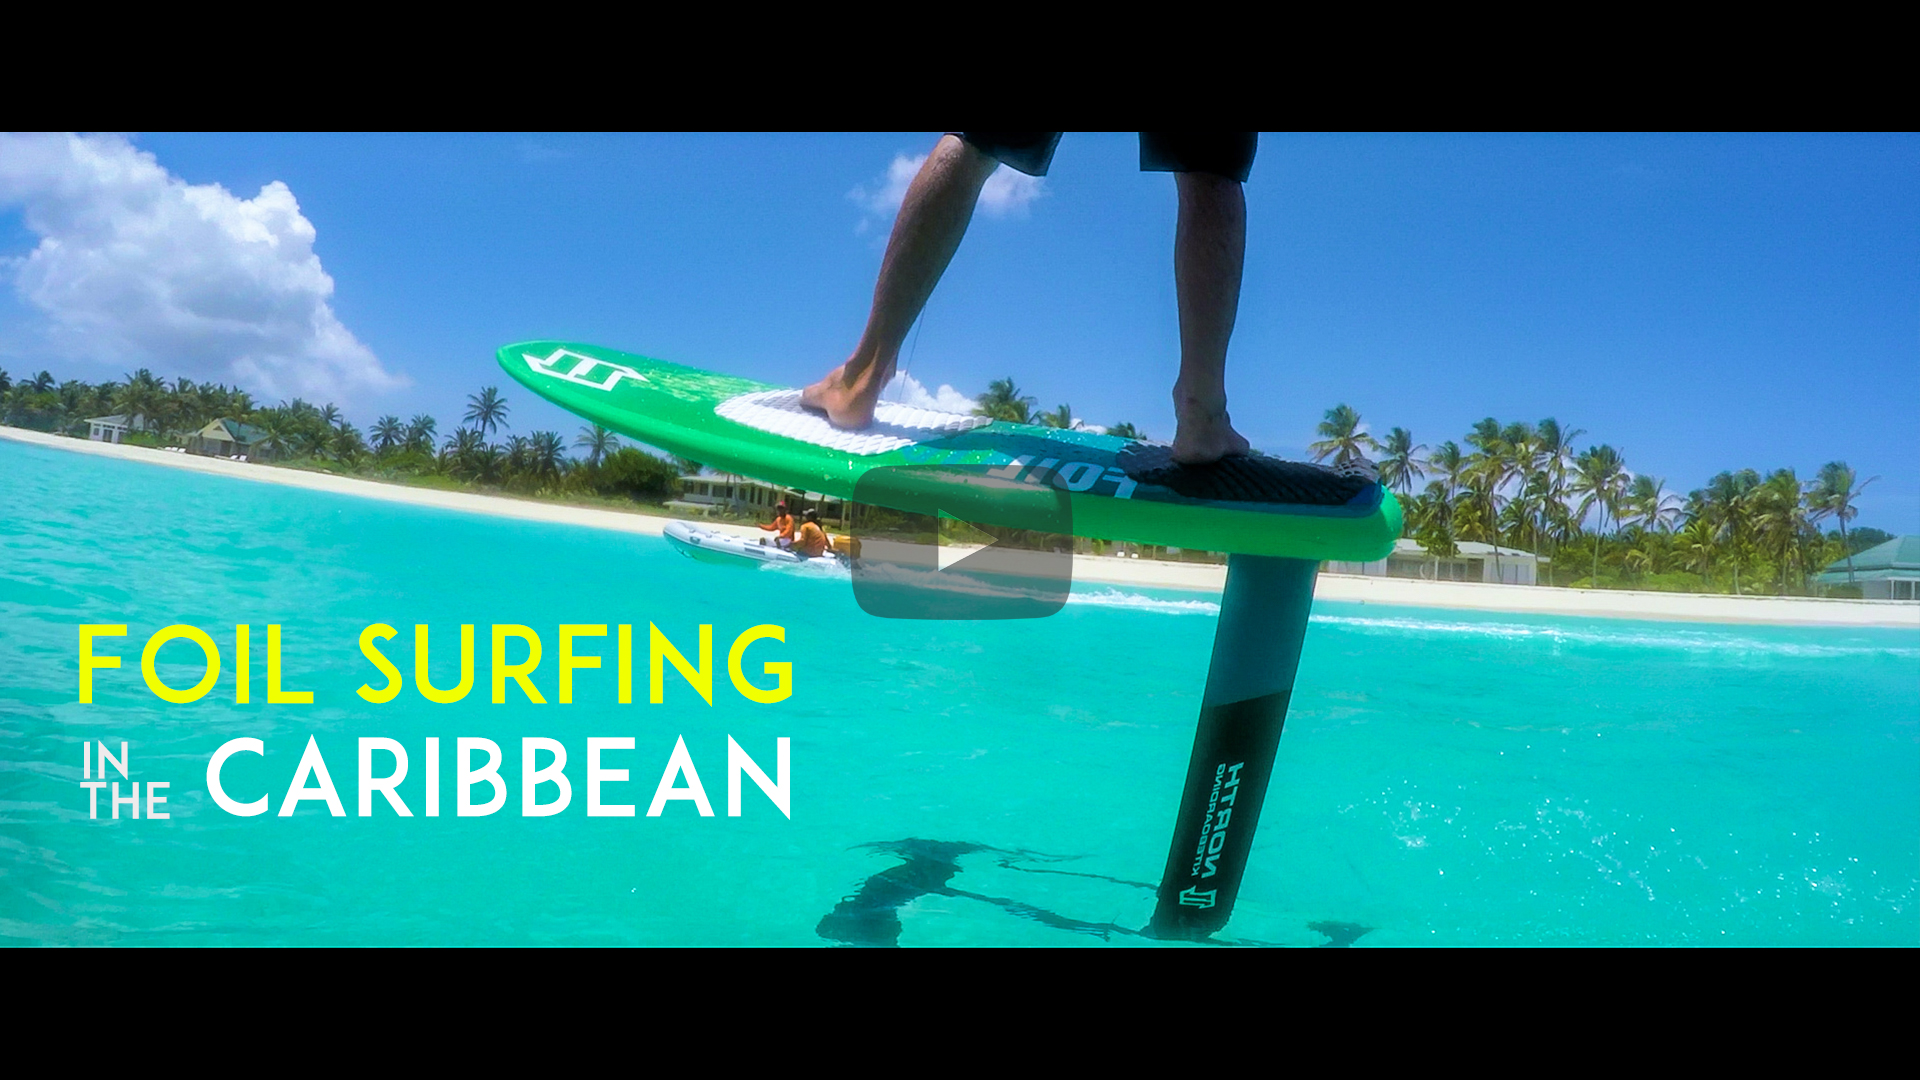 Foil Surfing in the Caribbean